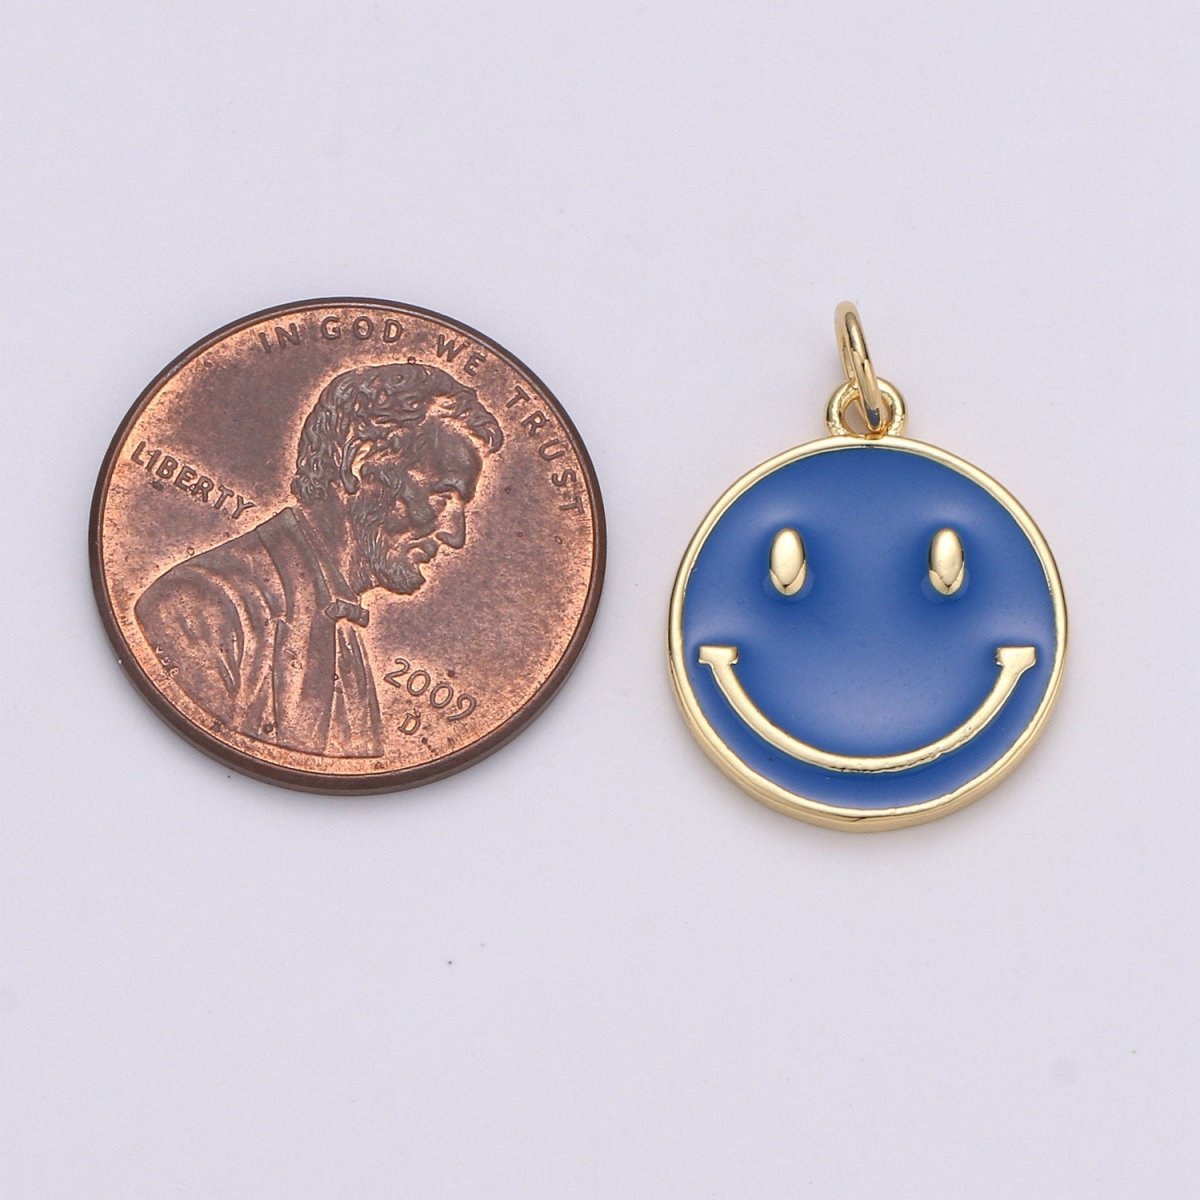 Epoxy Happy Face in Gold Round Charm, Enamel Happy Face Charm, Smiley Gold Enamel Charms, Dainty Smile charm, Teal, Red, White, Yellow, Cute Gold Smiley Face Gold Filled Charm - D-136 TO D-145 - DLUXCA